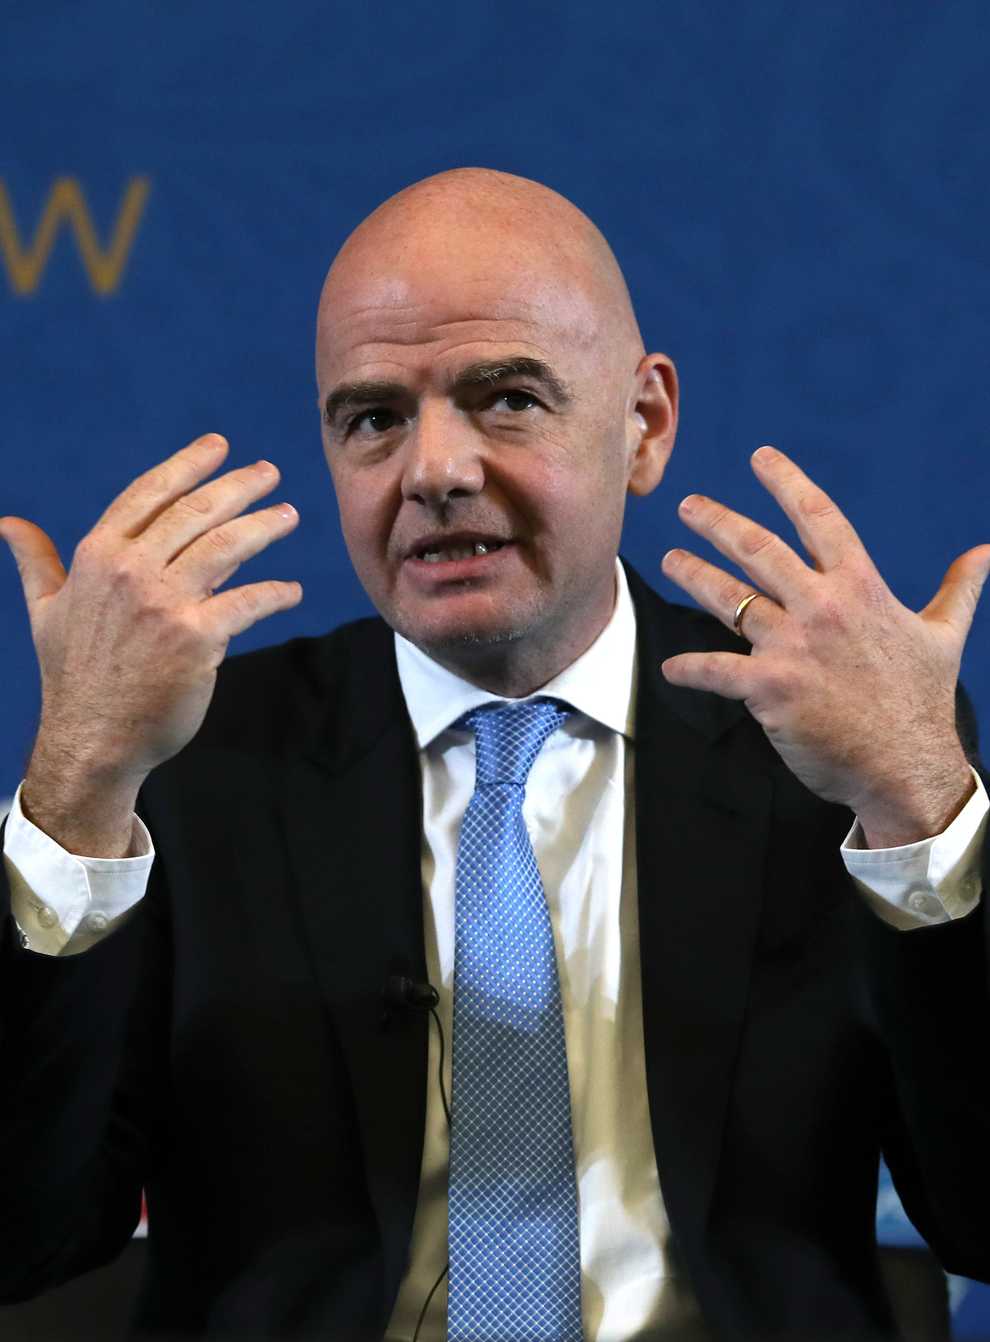 FIFA president Gianni Infantino has written to member associations about the opening of a criminal investigation against him